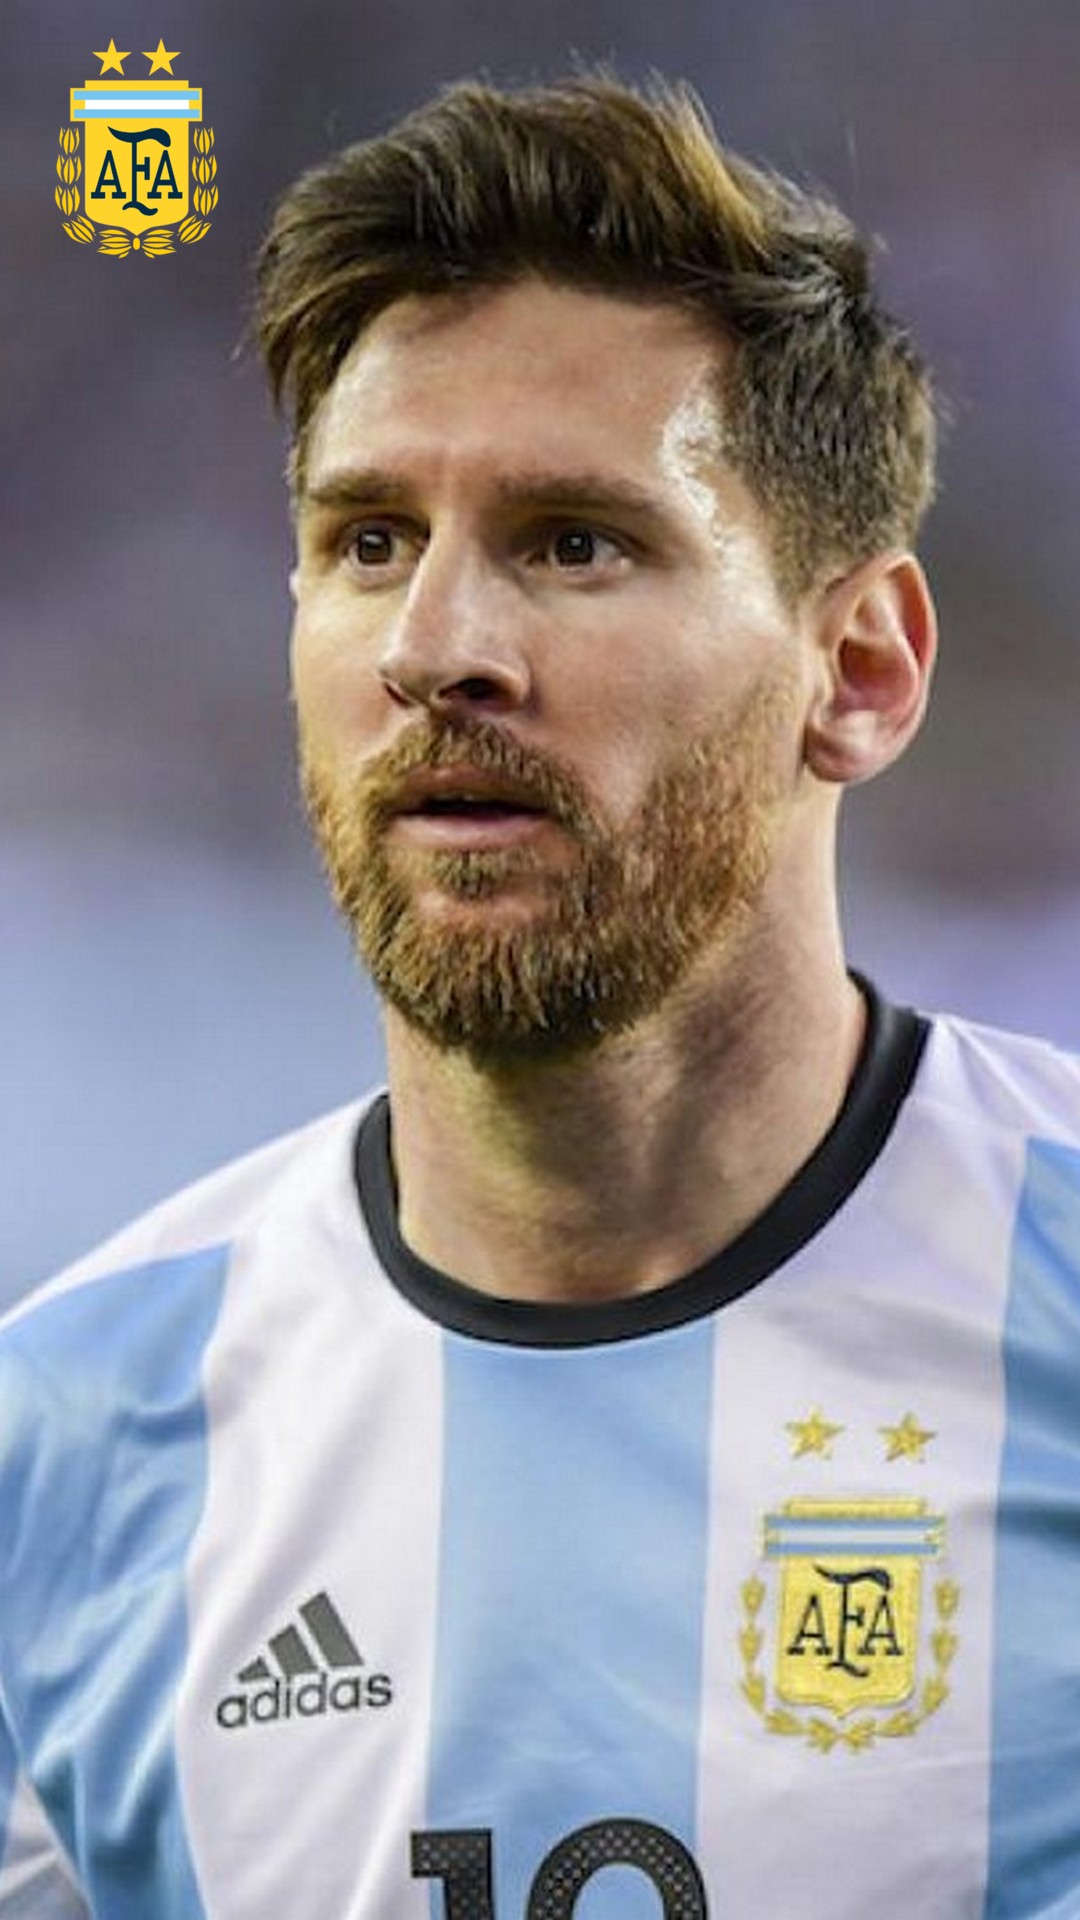 Wallpaper Messi Argentina iPhone with resolution 1080X1920 pixel. You can make this wallpaper for your iPhone 5, 6, 7, 8, X backgrounds, Mobile Screensaver, or iPad Lock Screen